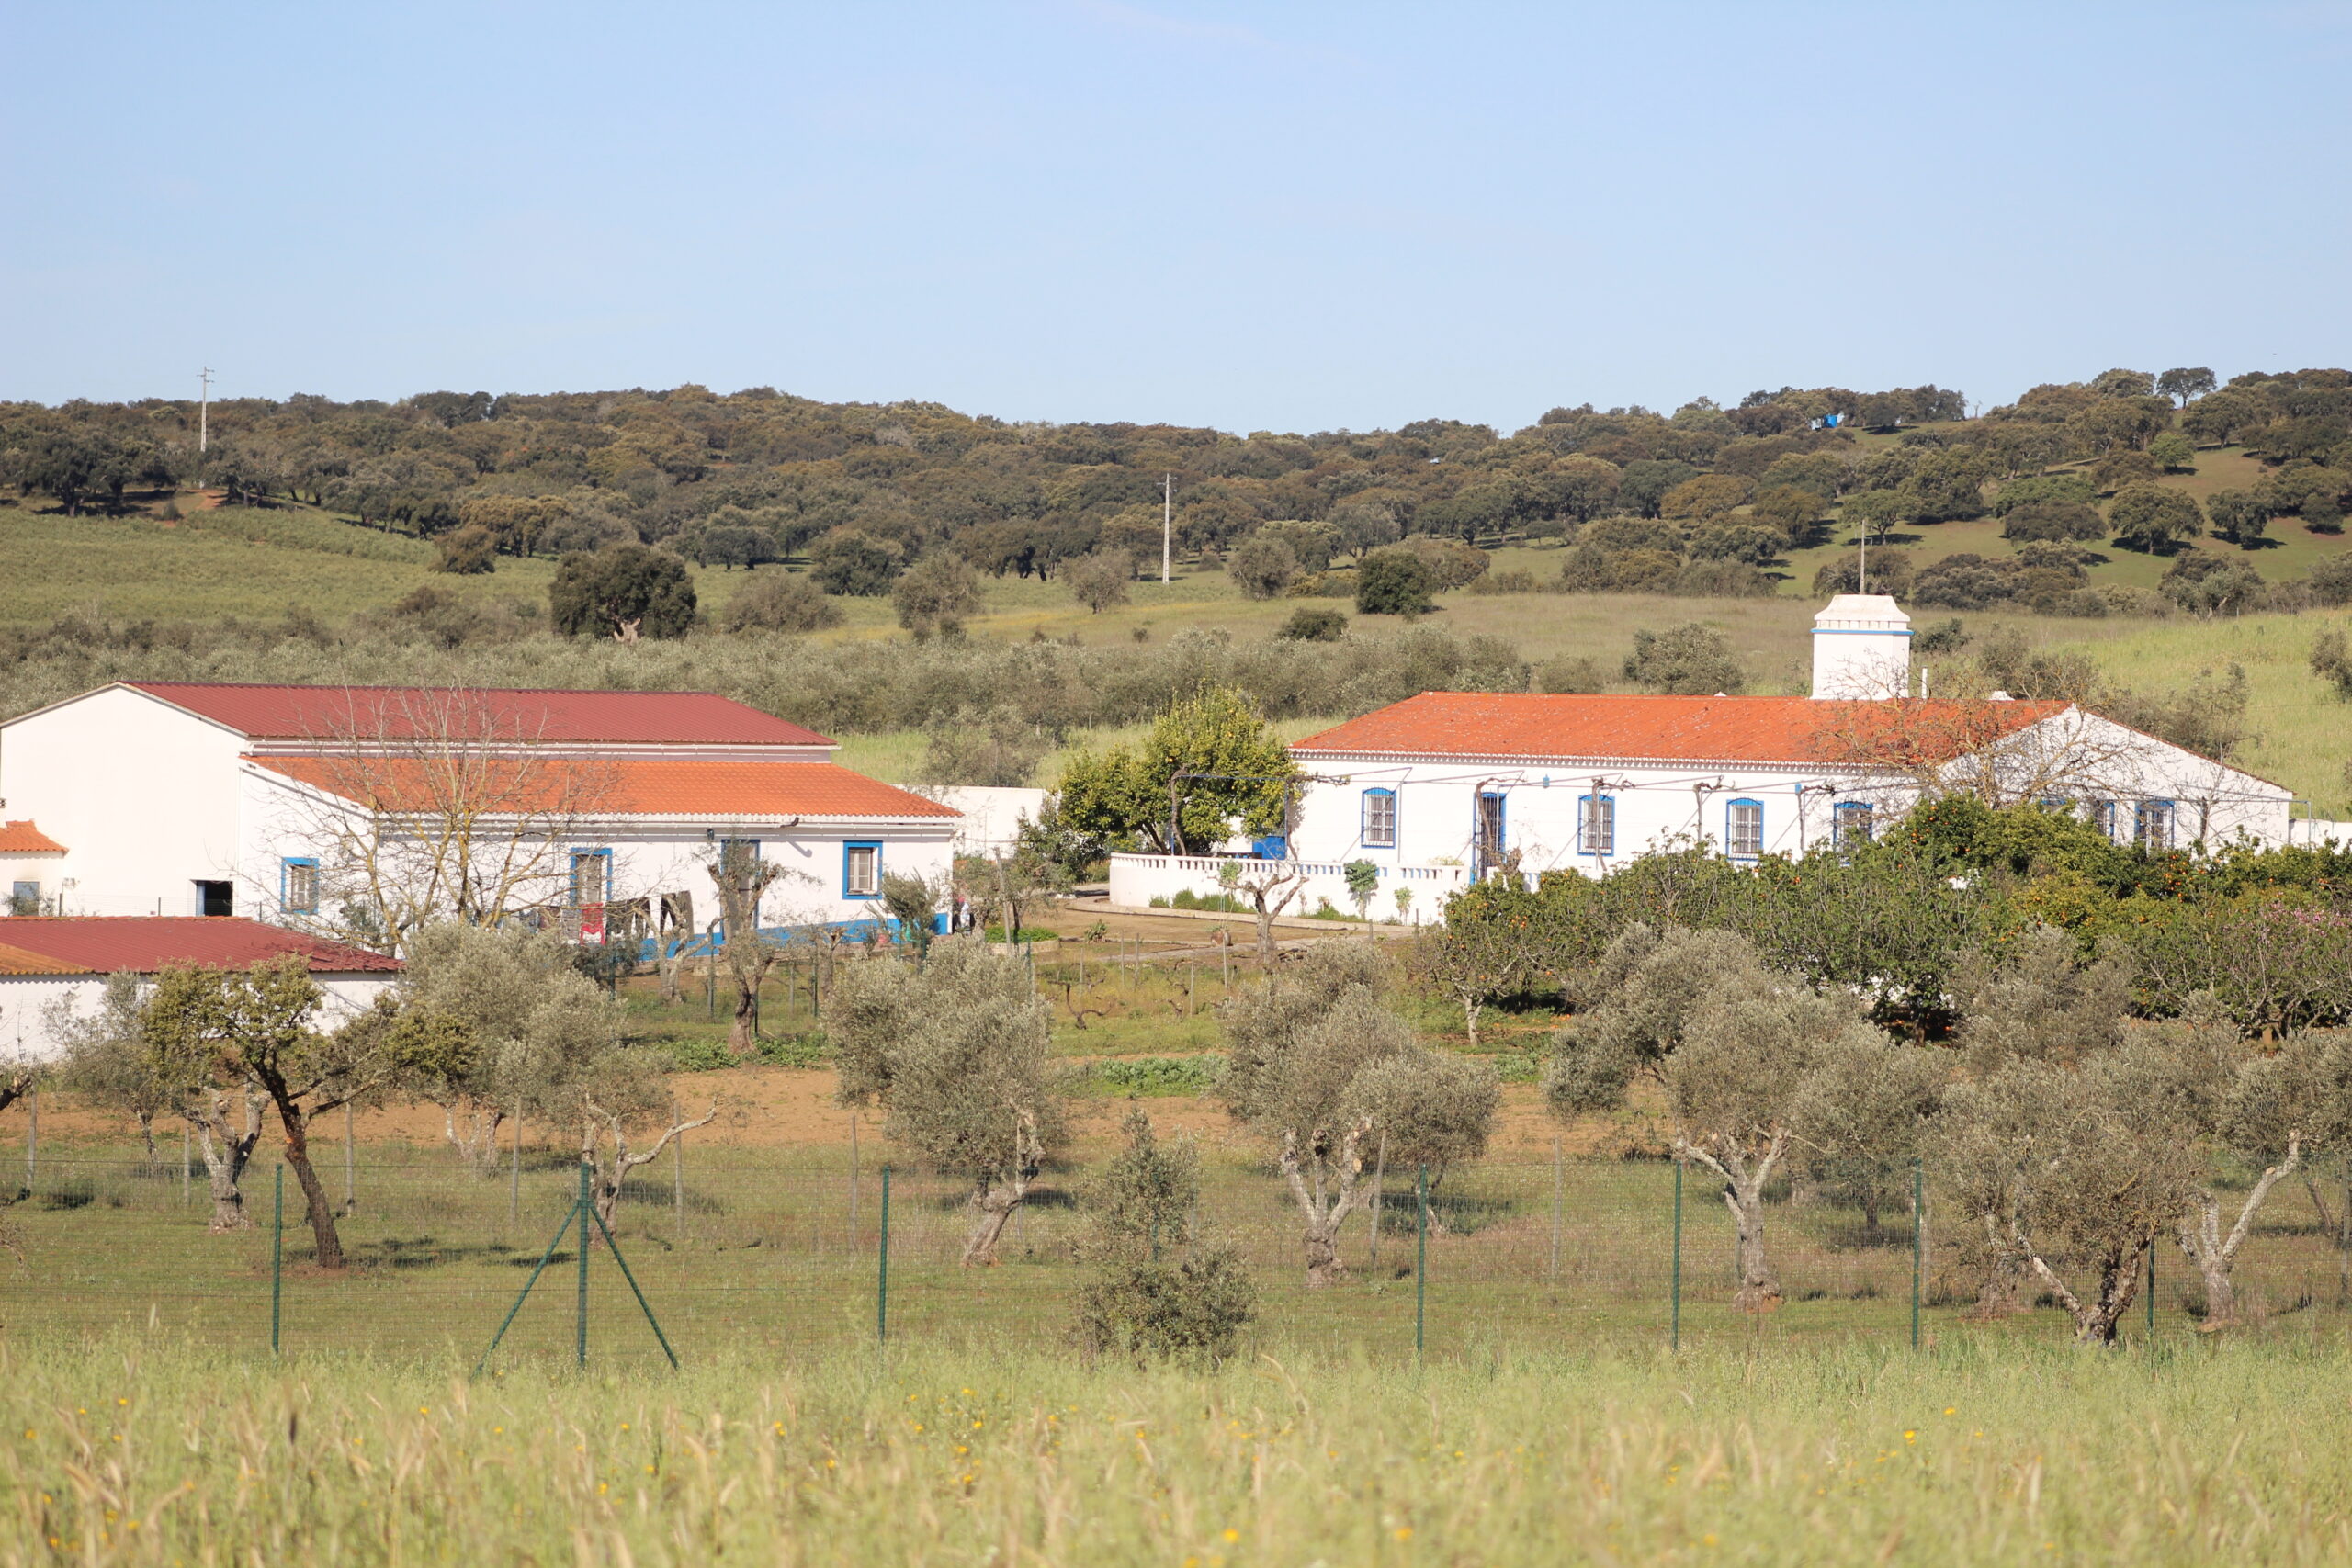 A traditional Monte, very well maintained. Very quiet location near Alvito and Vidigueira, halfway between Evora and  Beja, Alentejo.